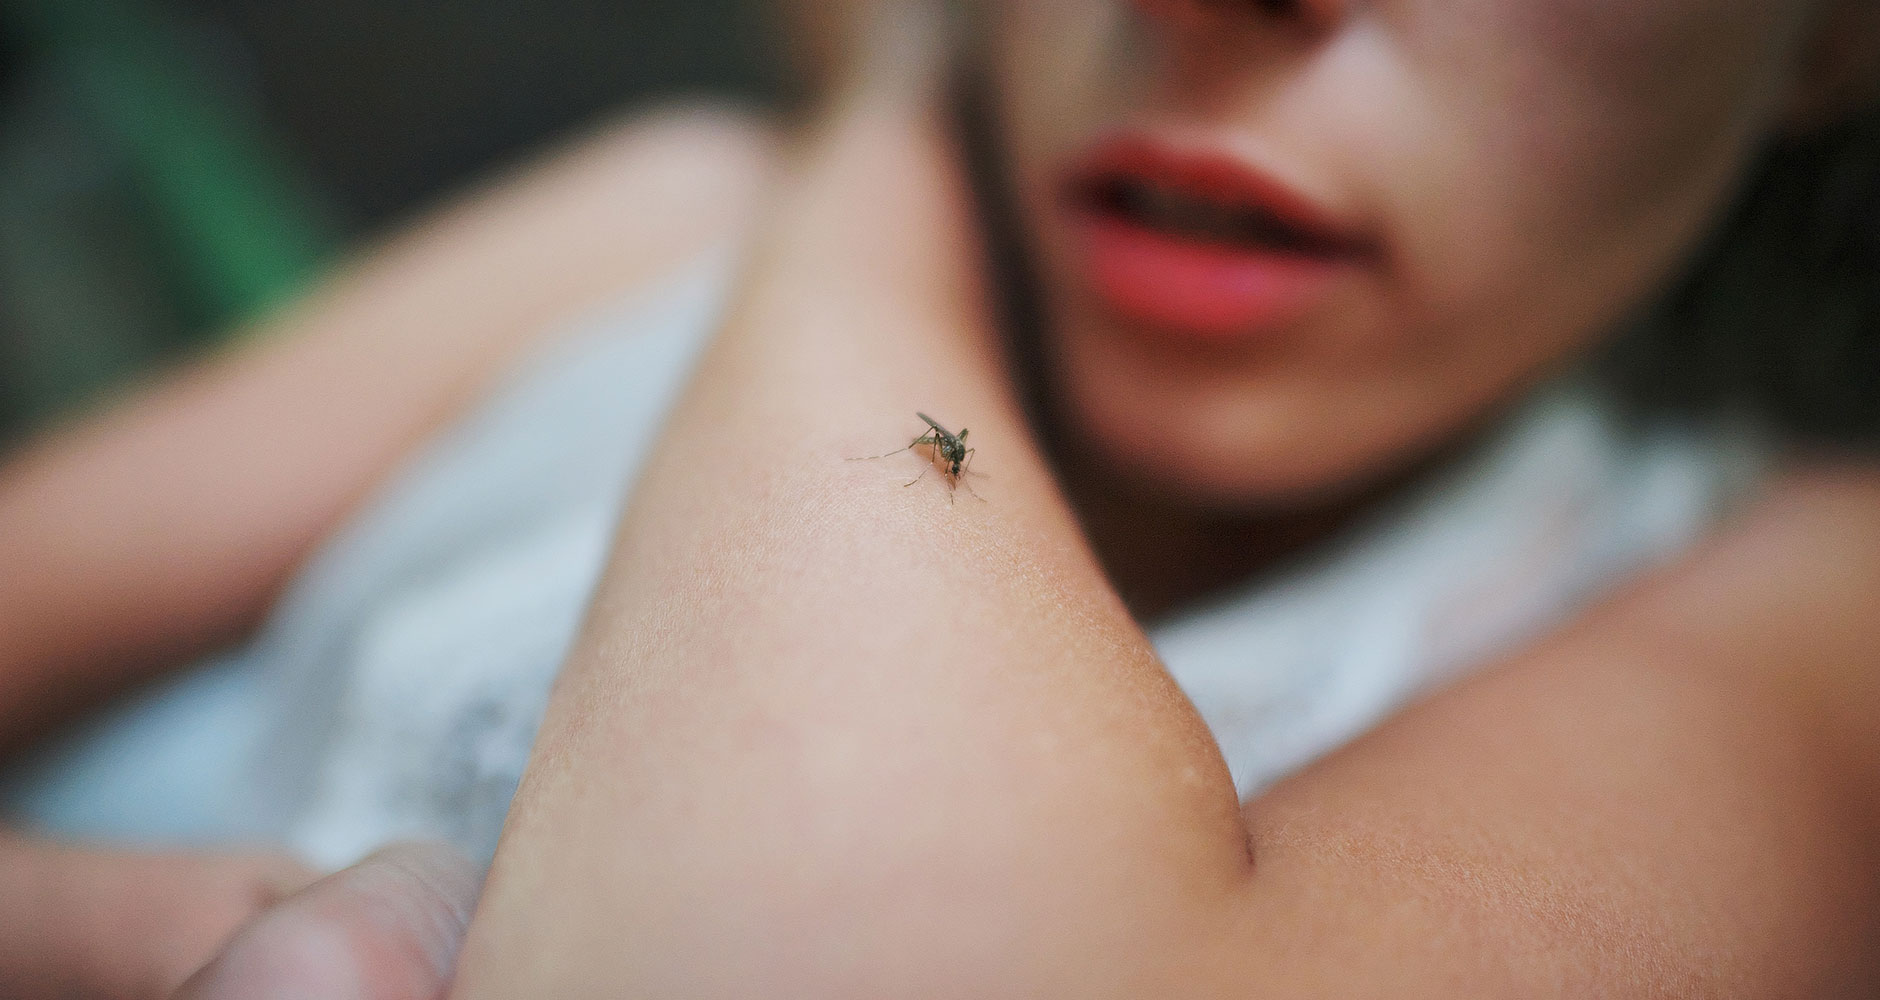 Are You a Mosquito Magnet? 5 Things You Are Doing Wrong